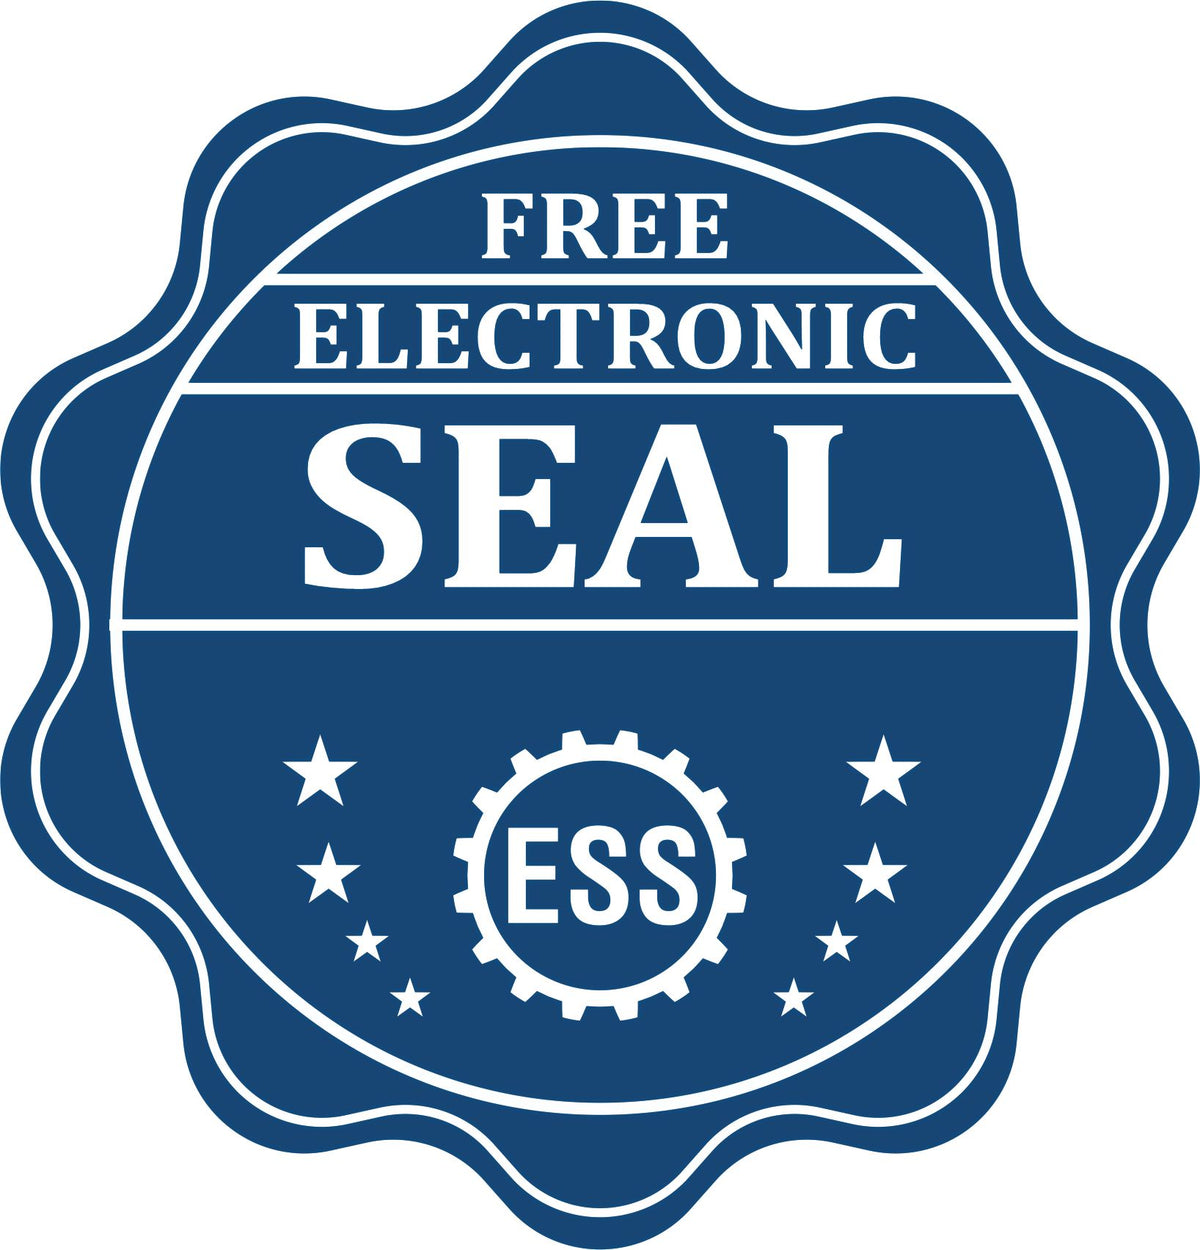 A badge showing a free electronic seal for the Slim Pre-Inked State Seal Notary Stamp for Montana with stars and the ESS gear on the emblem.